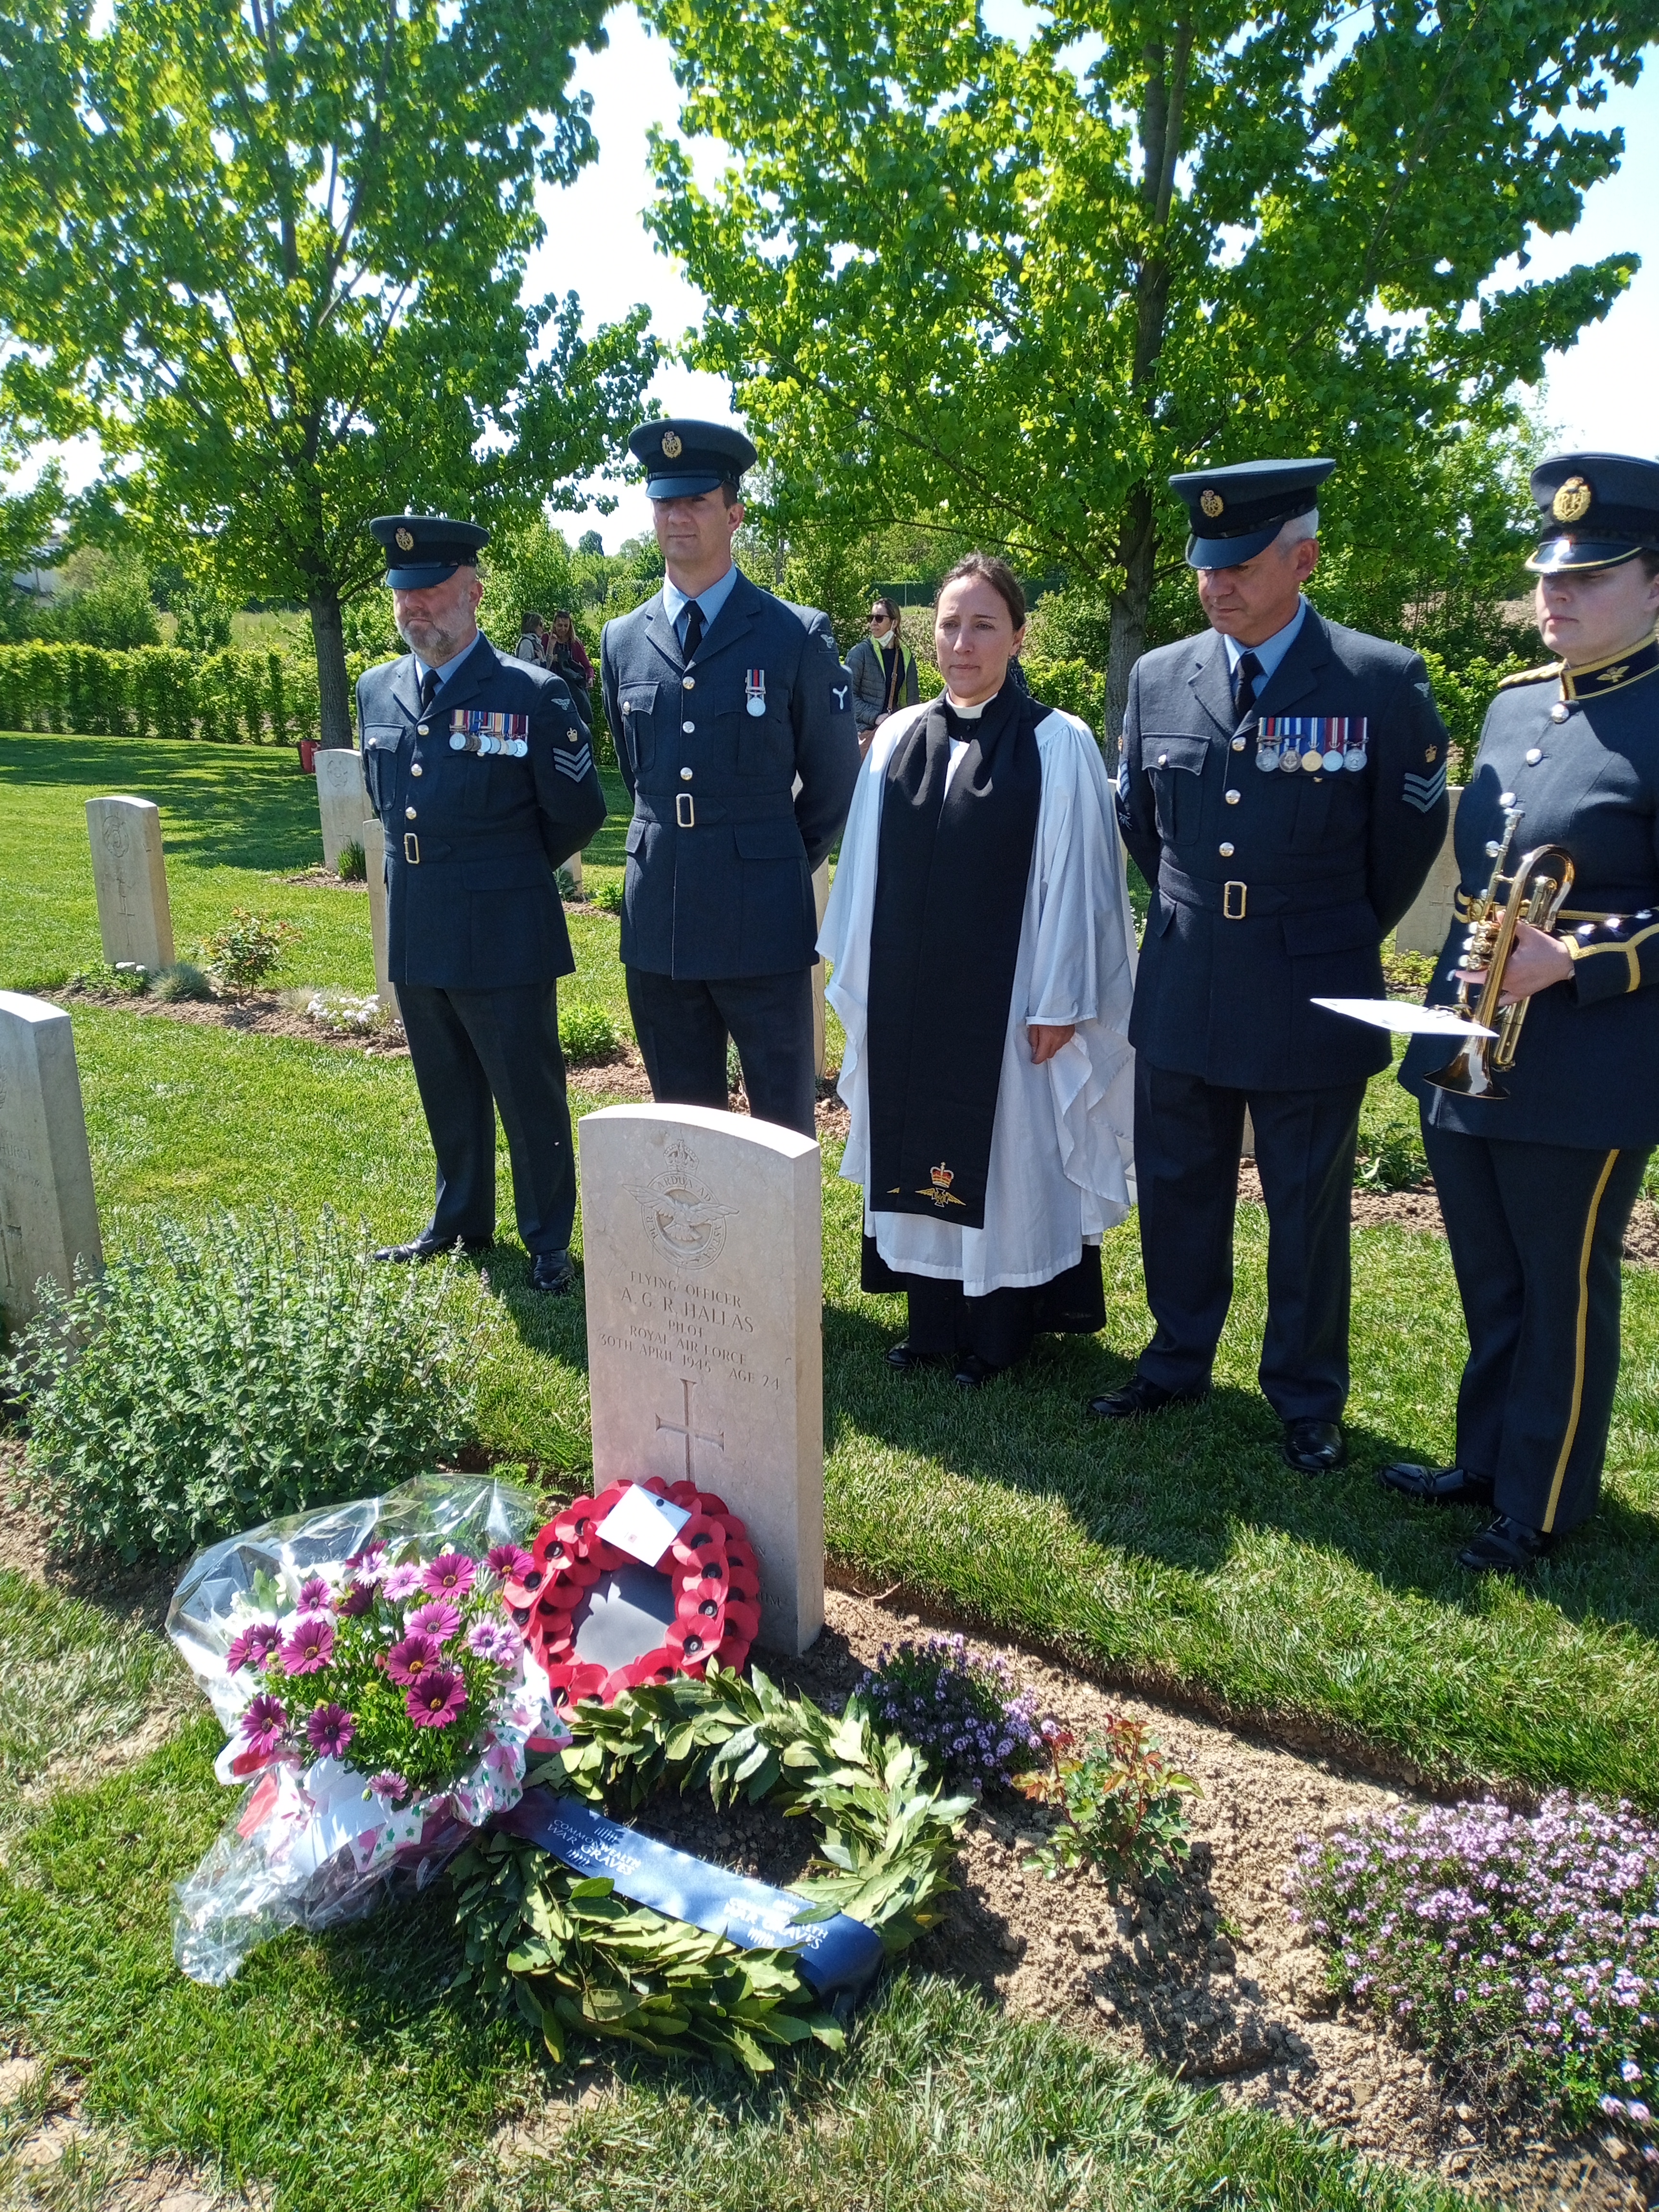 Personnel and Reverend stand by memorial.